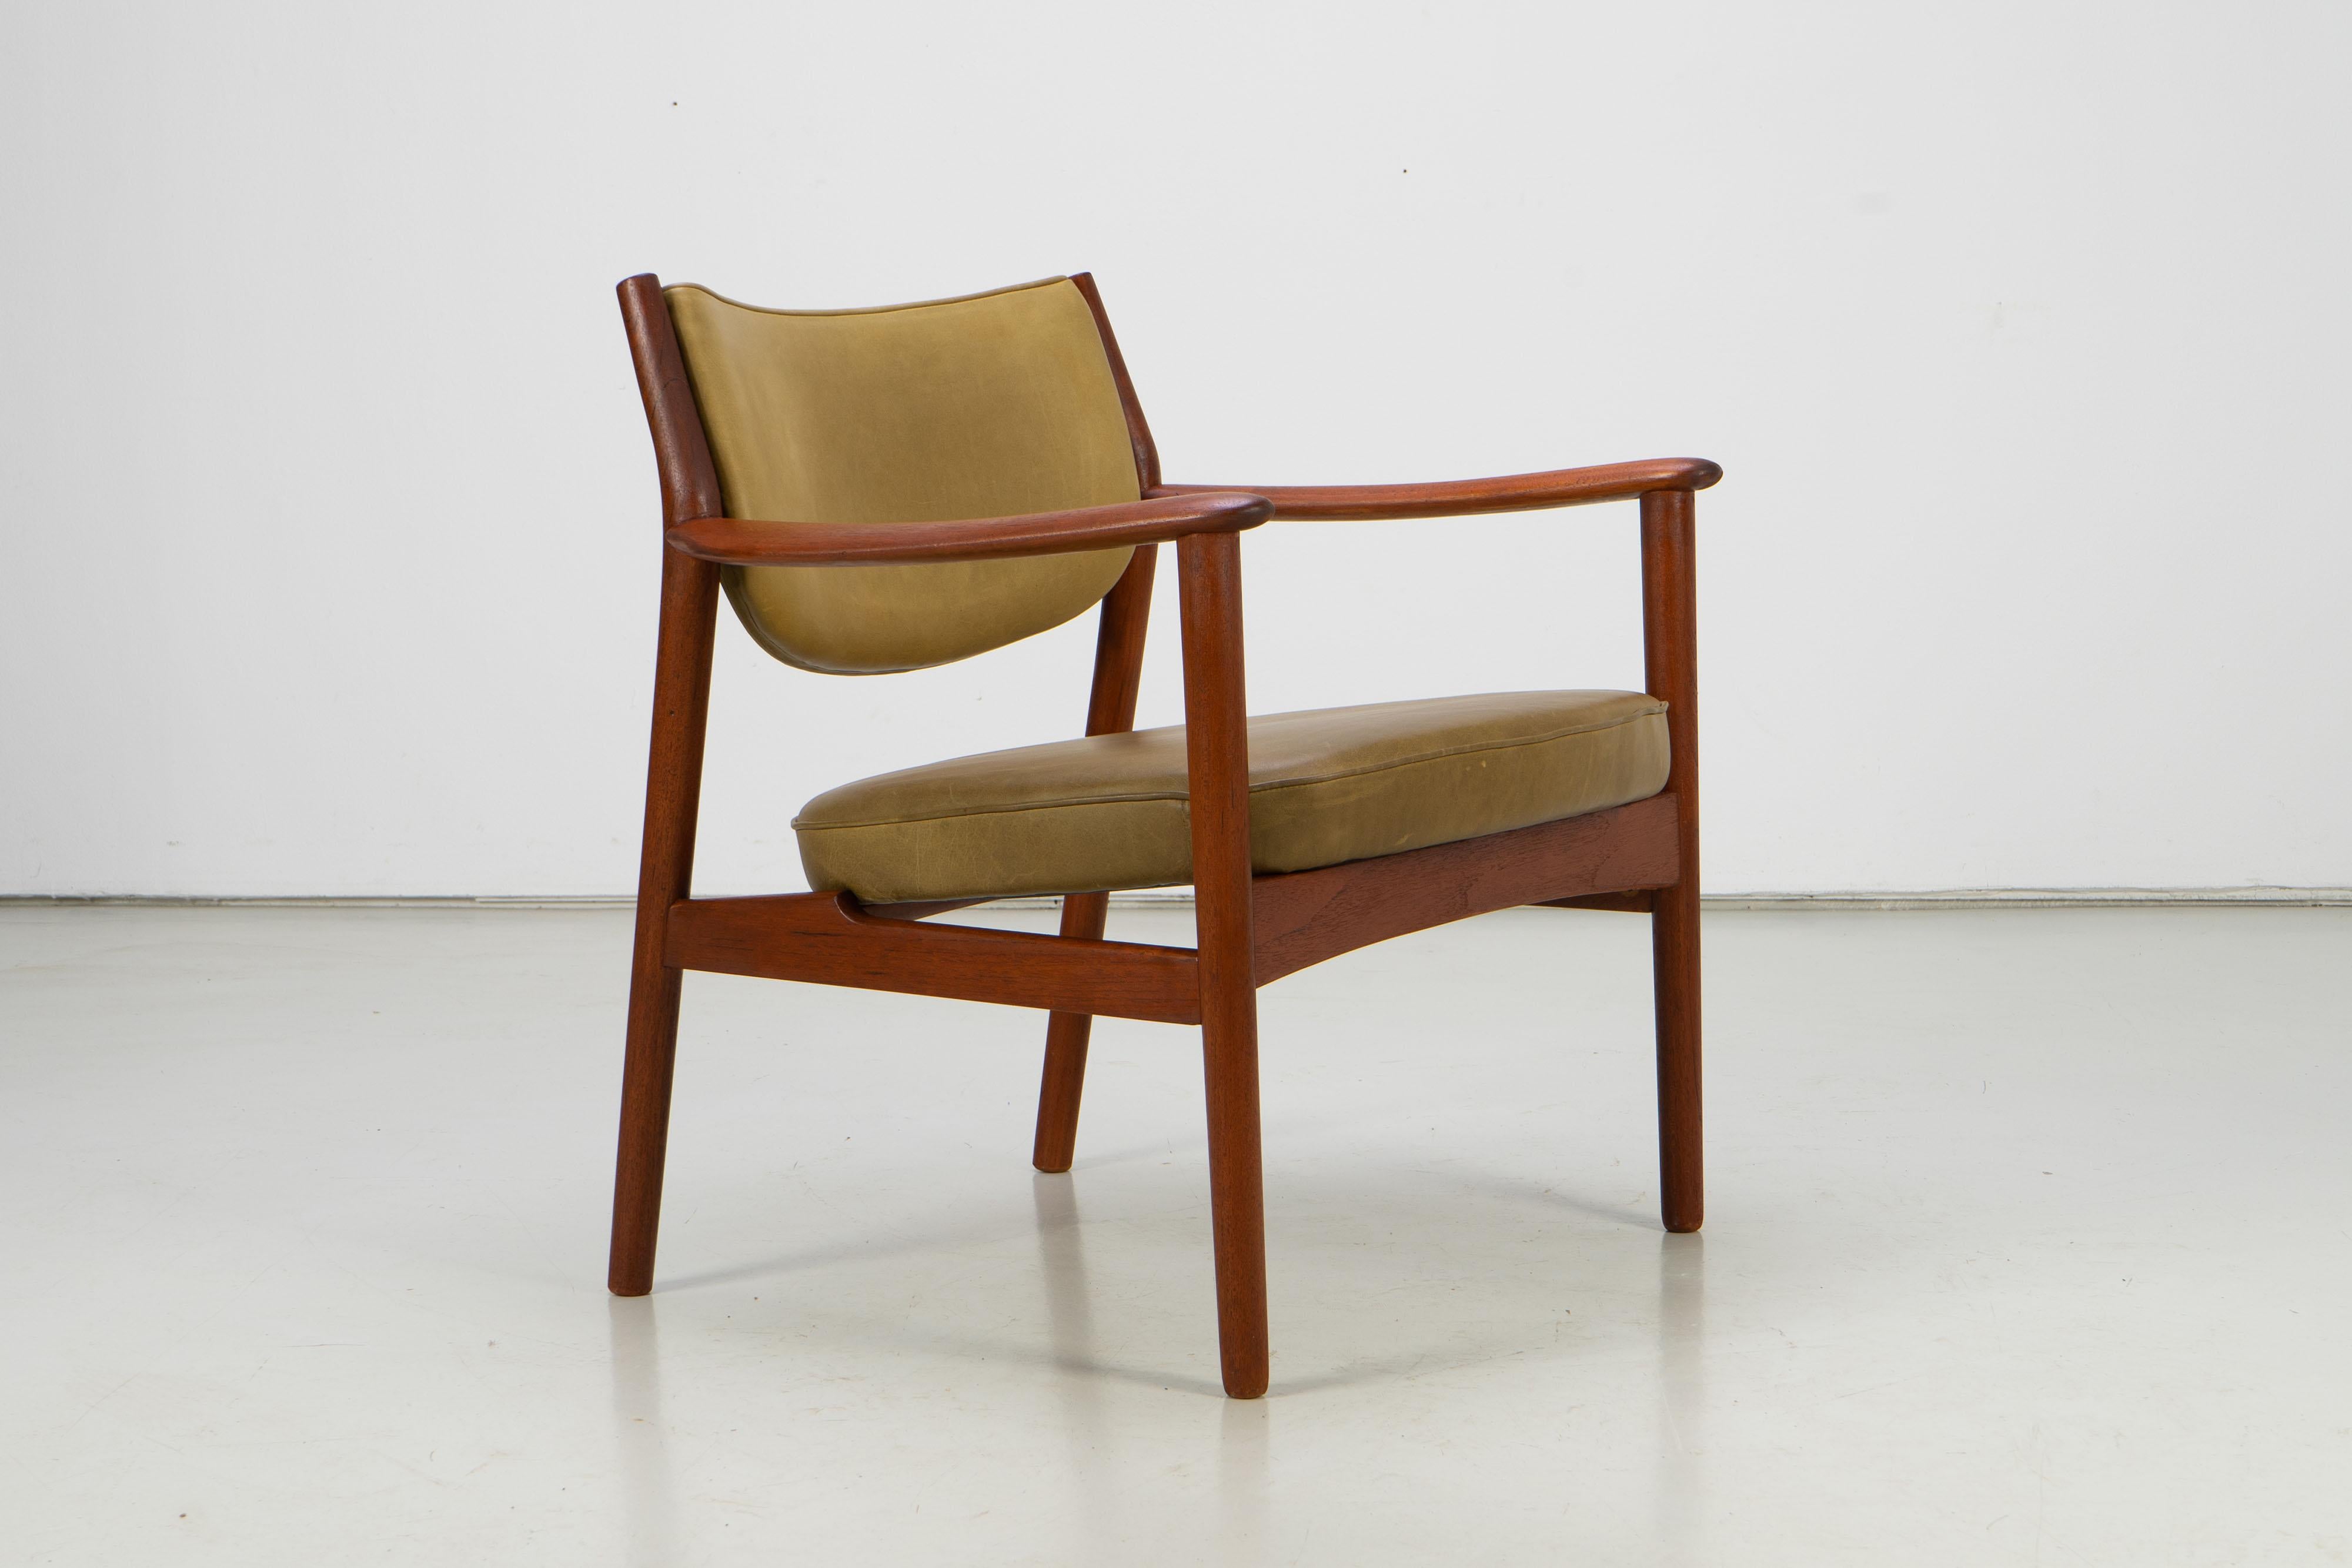 Pair of Scandinavian Easy Chairs with Teak and Leather by Westnofa, 1960s For Sale 2